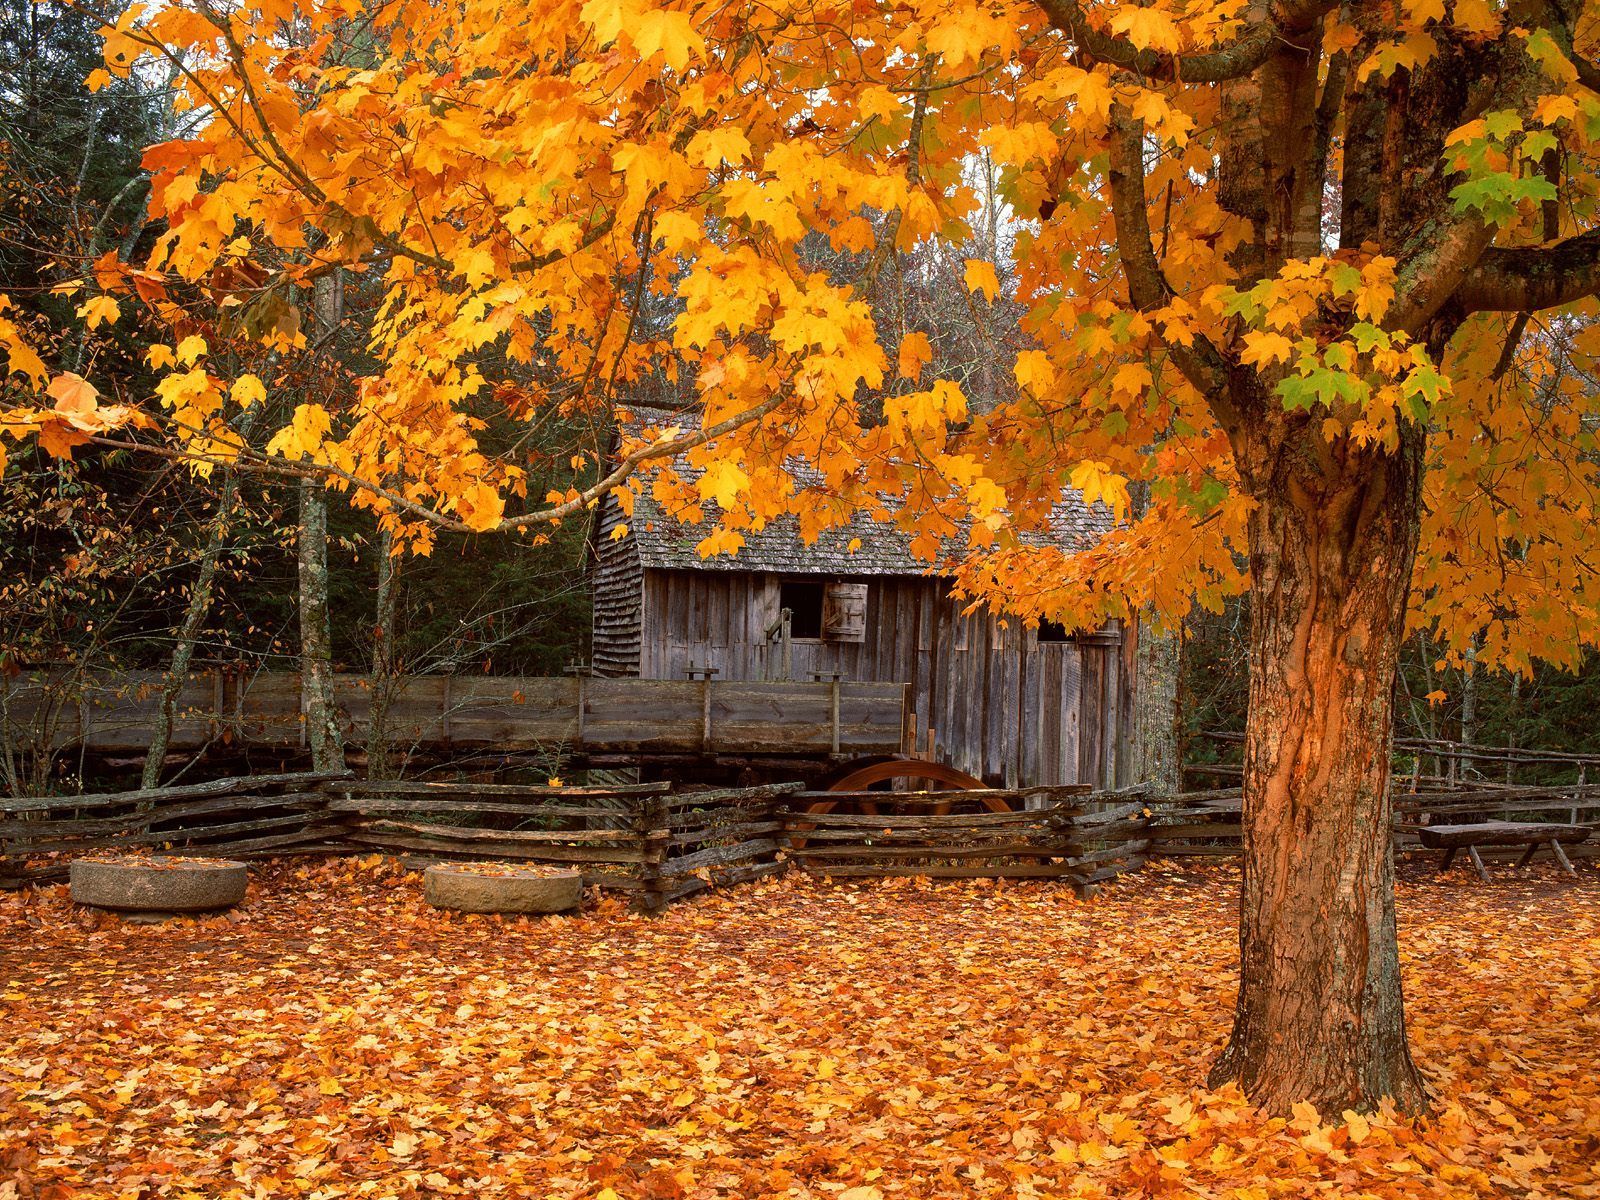 Cades Cove, TN in the fall. Smoky Mountains. Autumn scenery, Fall